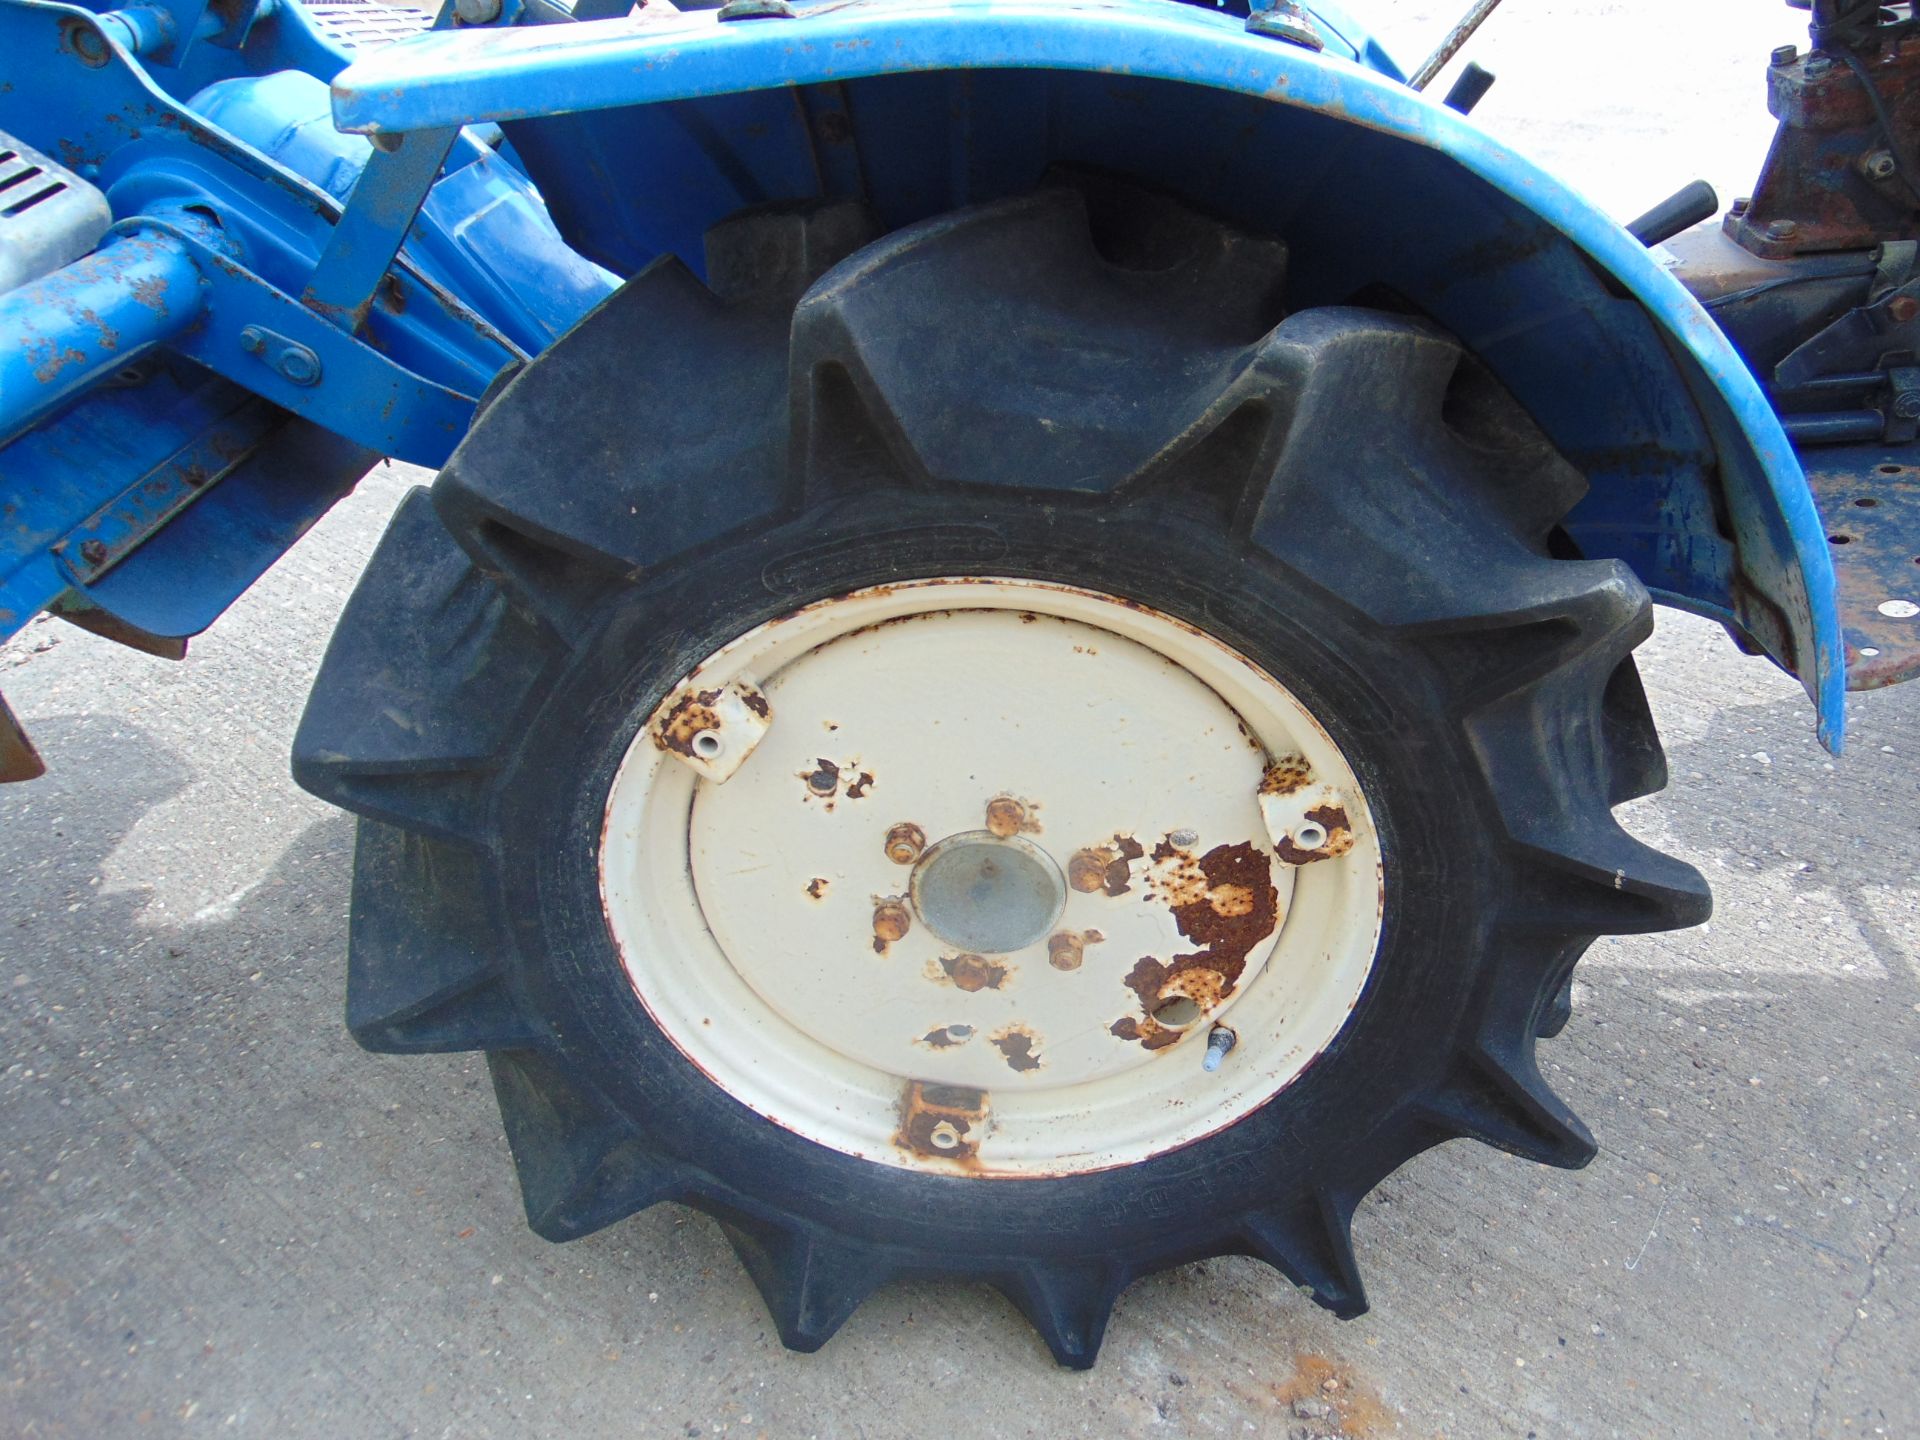 Iseki TX1410 4x4 Compact Tractor w/ Rotary Tiller - Image 15 of 24